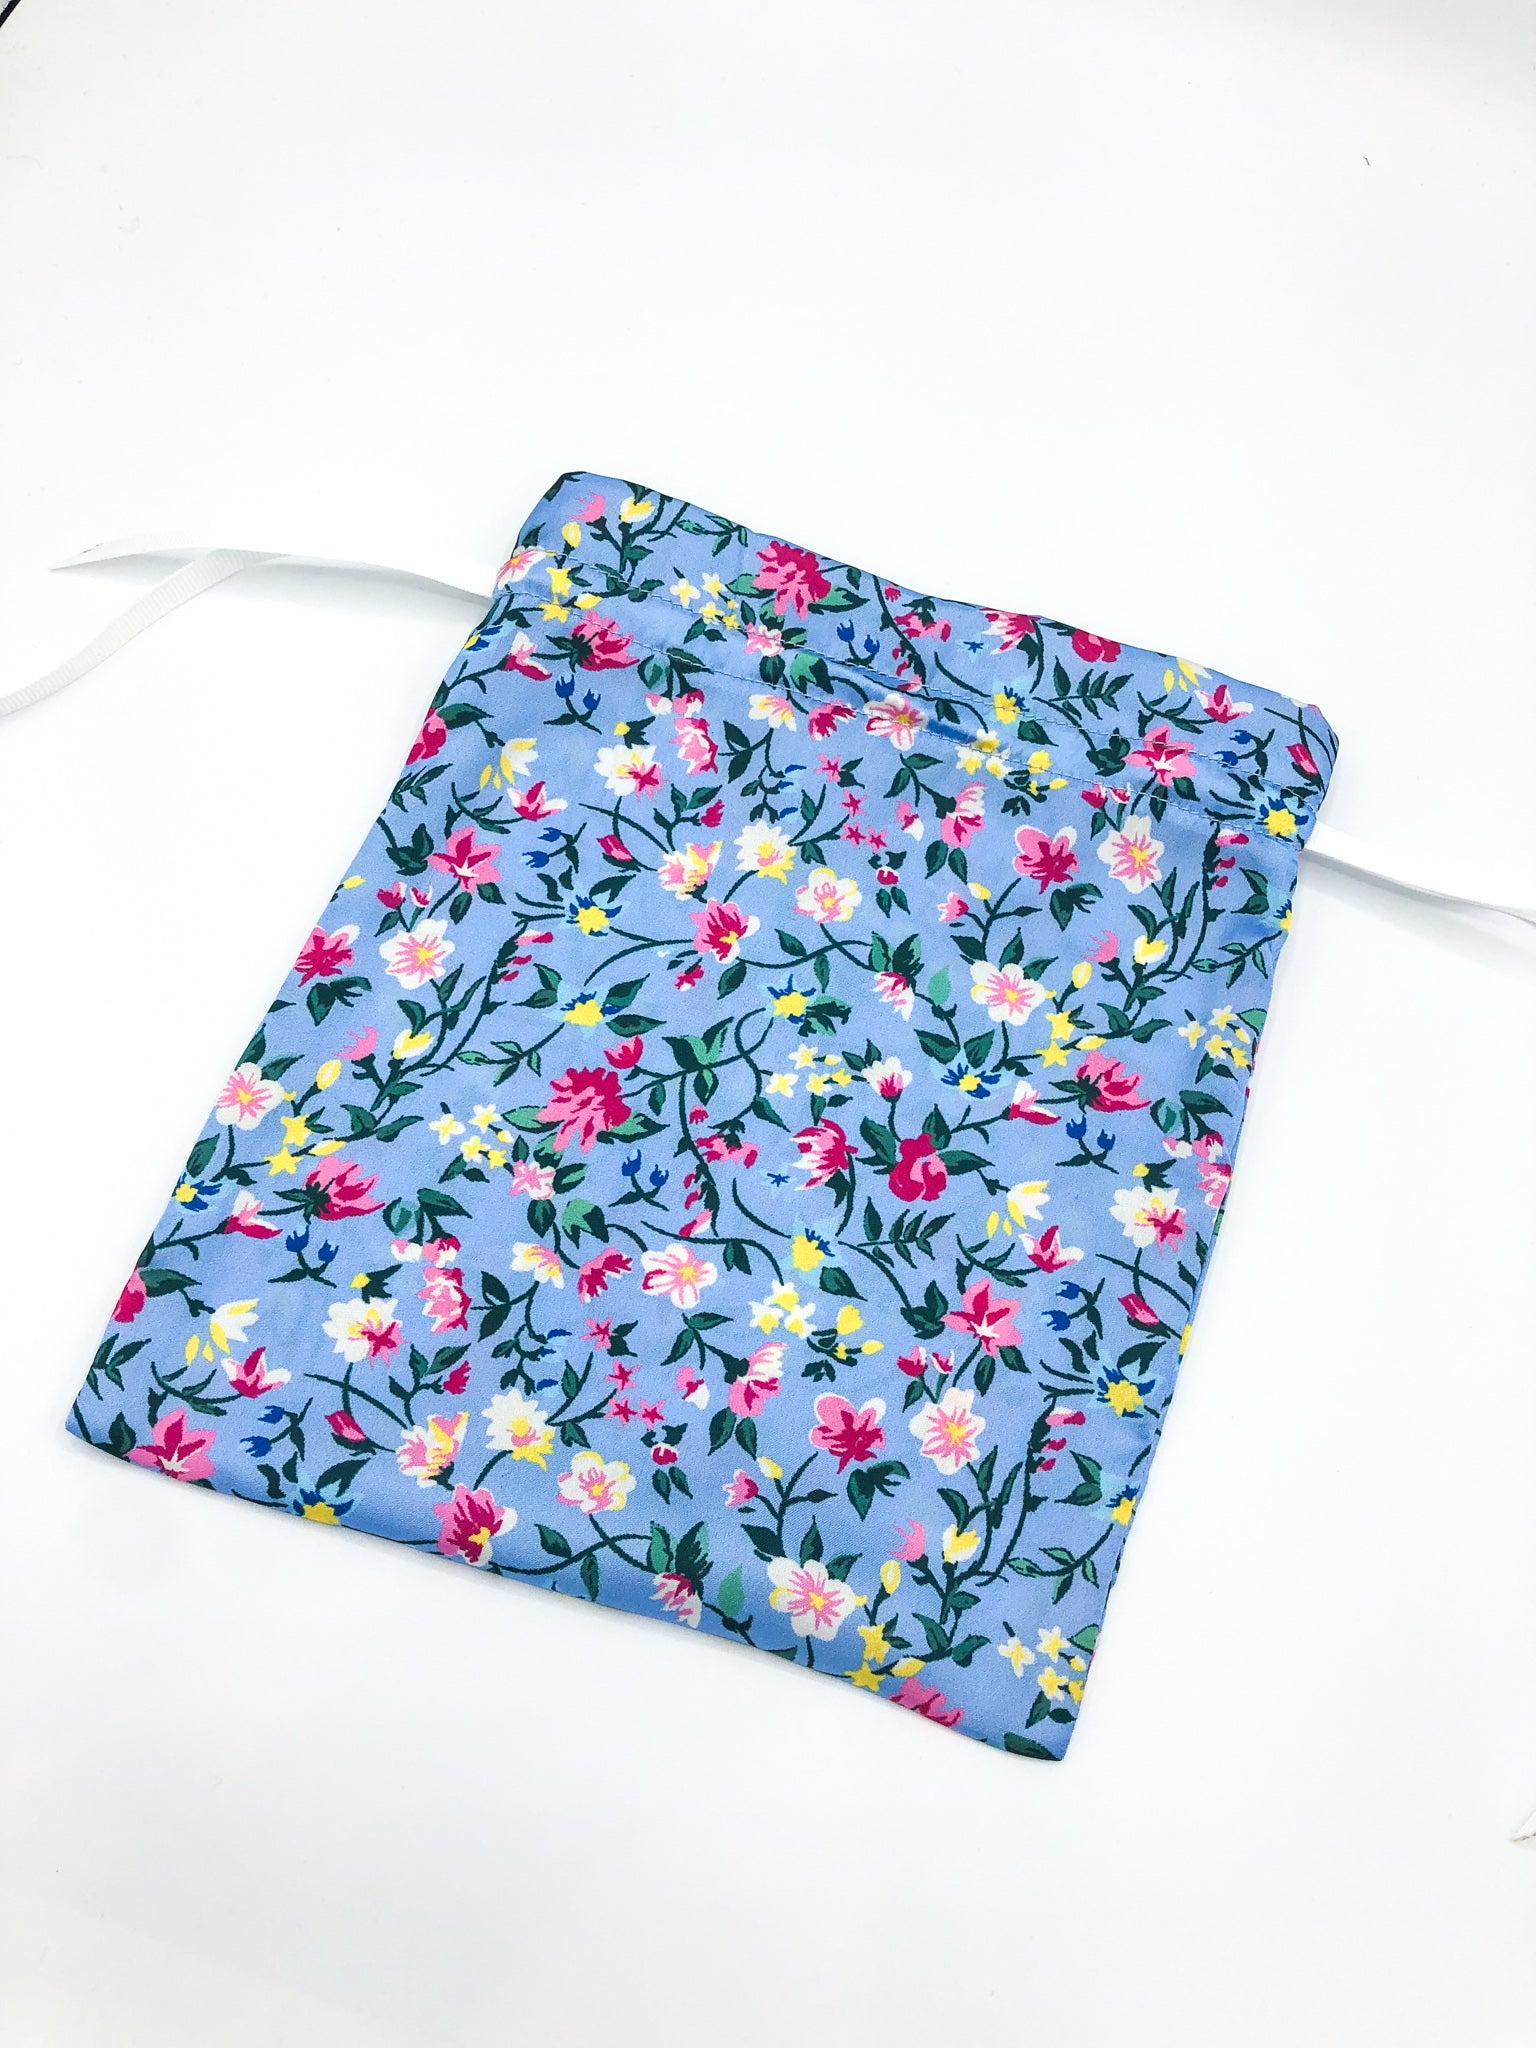 Klein Blue Floral Face Covering and Matching Bag